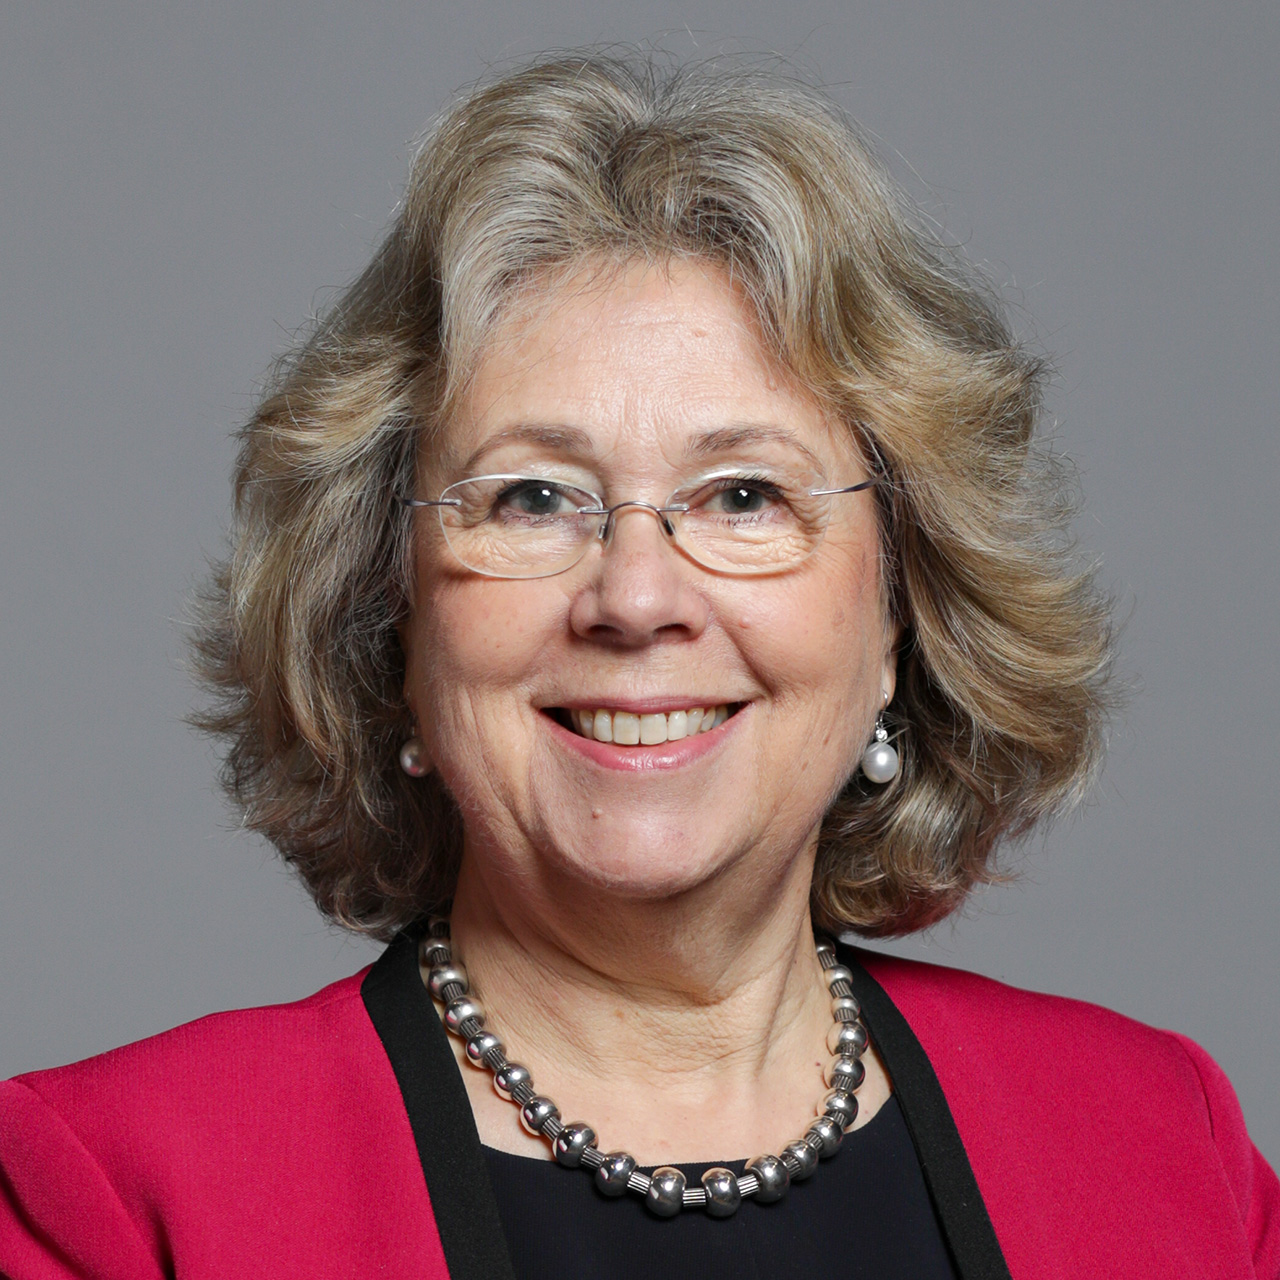 The Rt. Hon. Baroness Northover